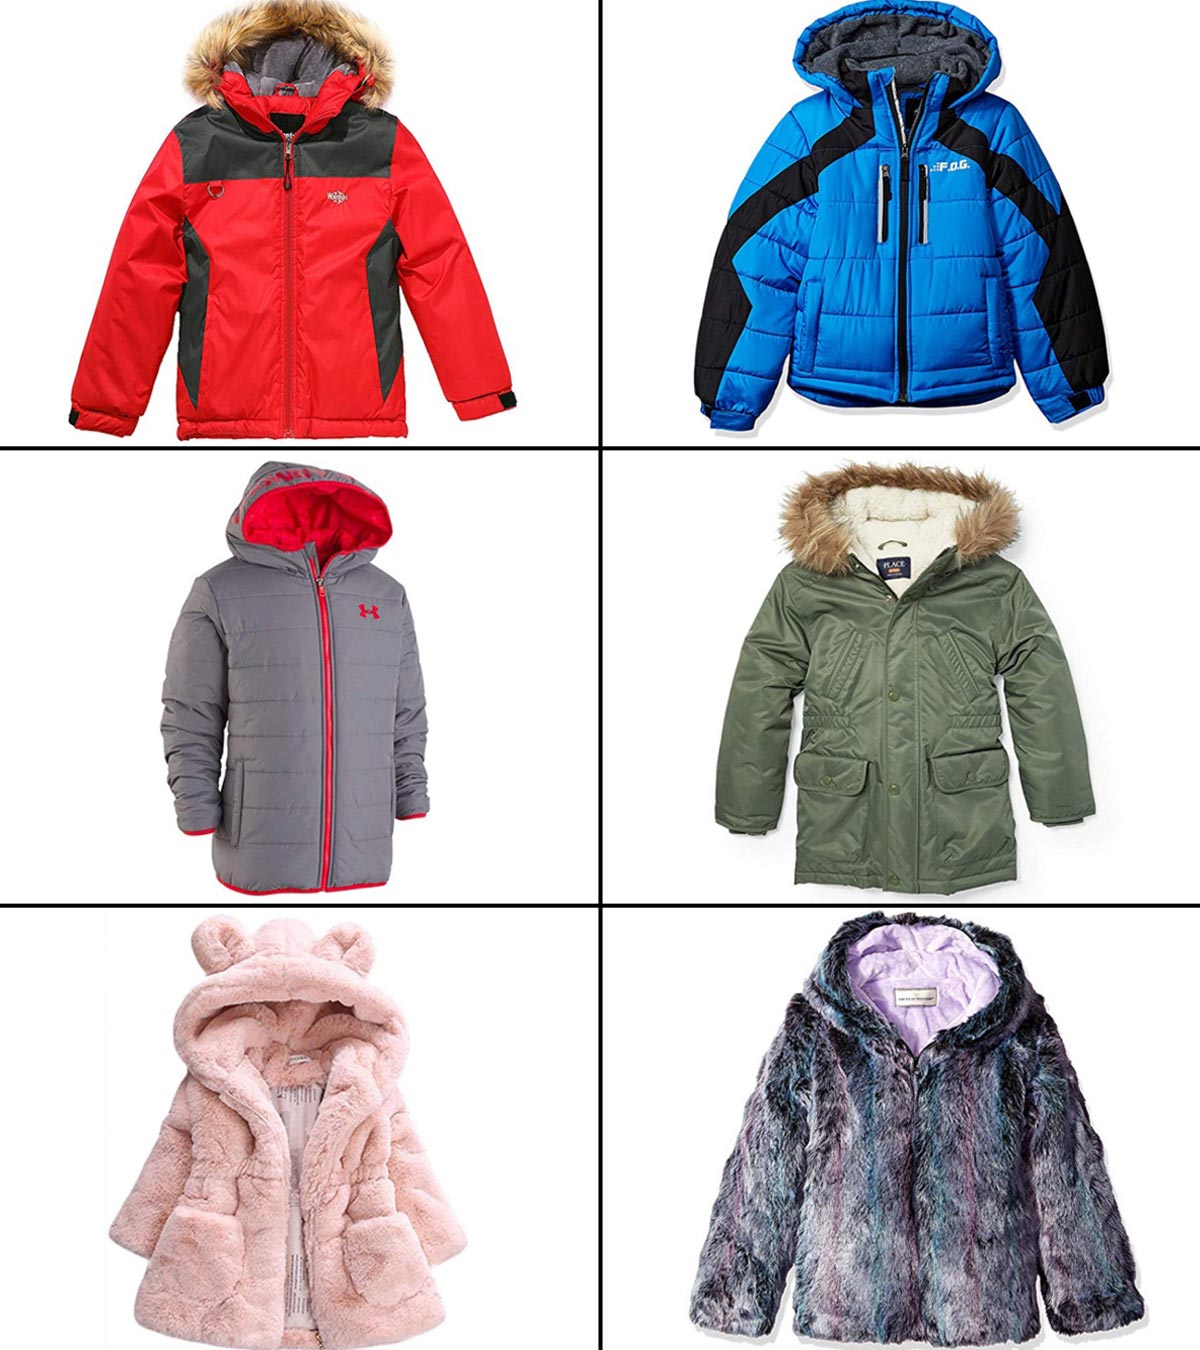 Best school coats 2023: Duffle coats, parkas and jackets for boys and girls